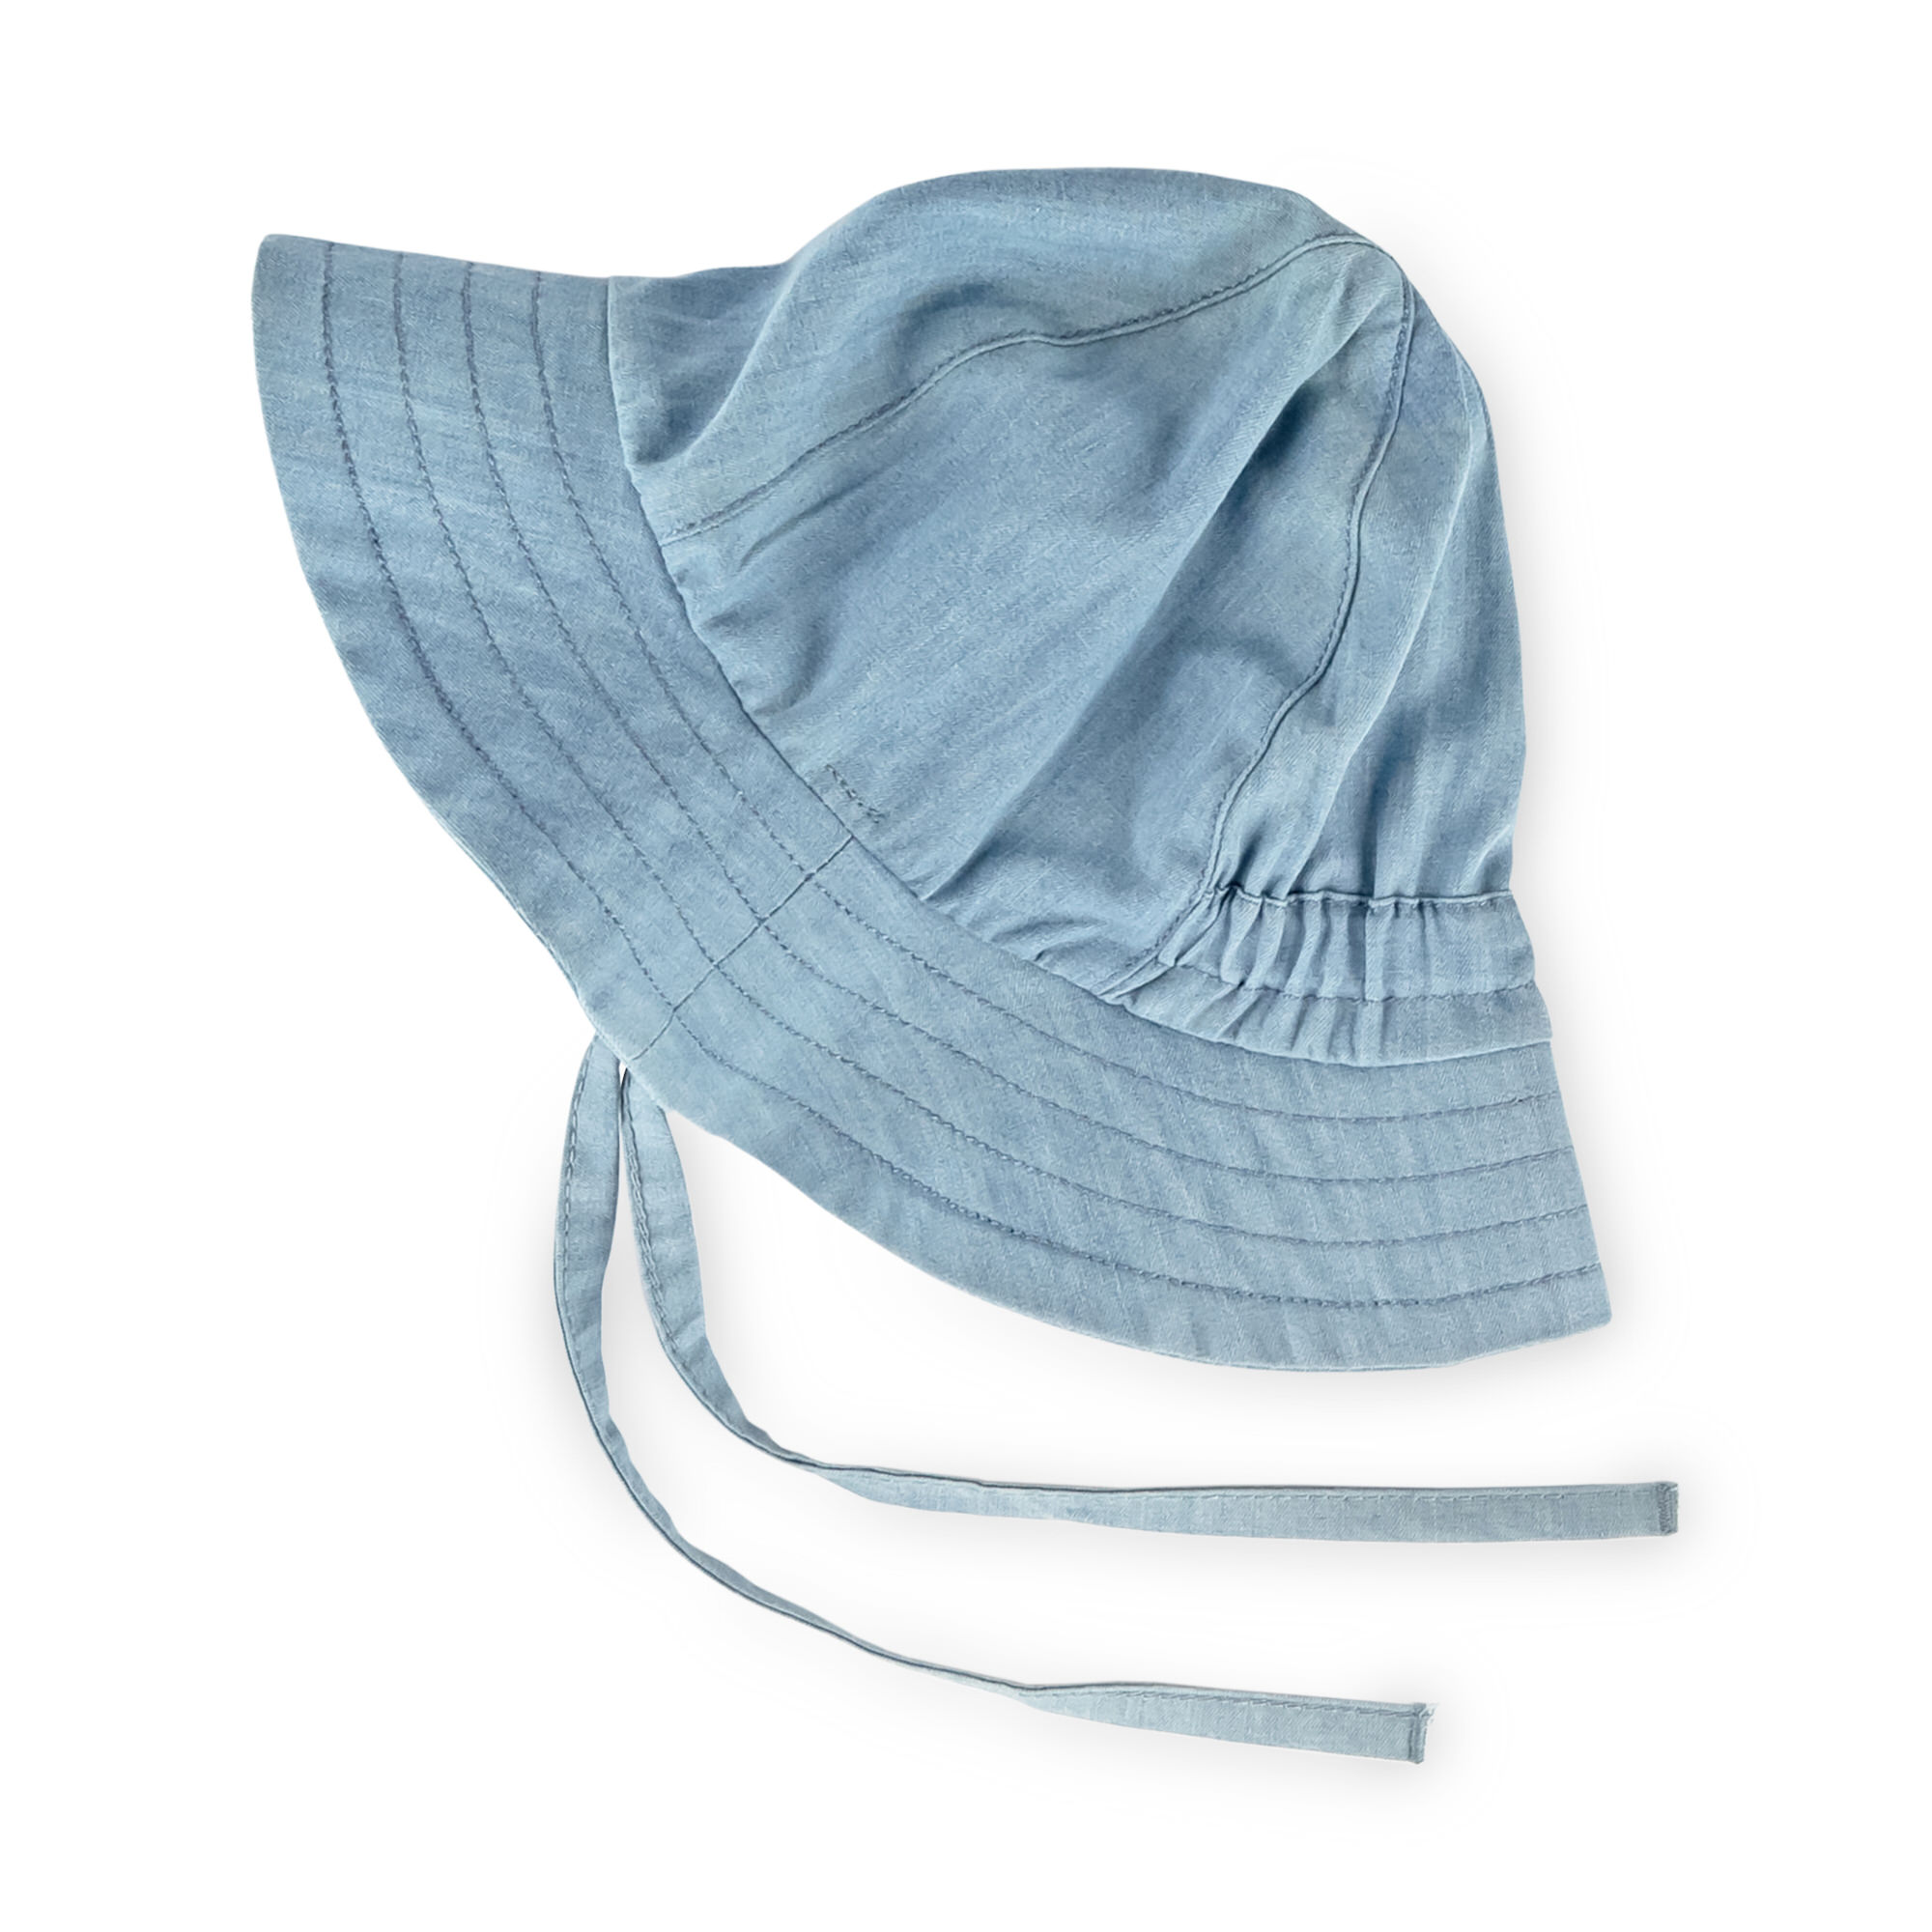 Brimmed baby sun hat with ties, light blue